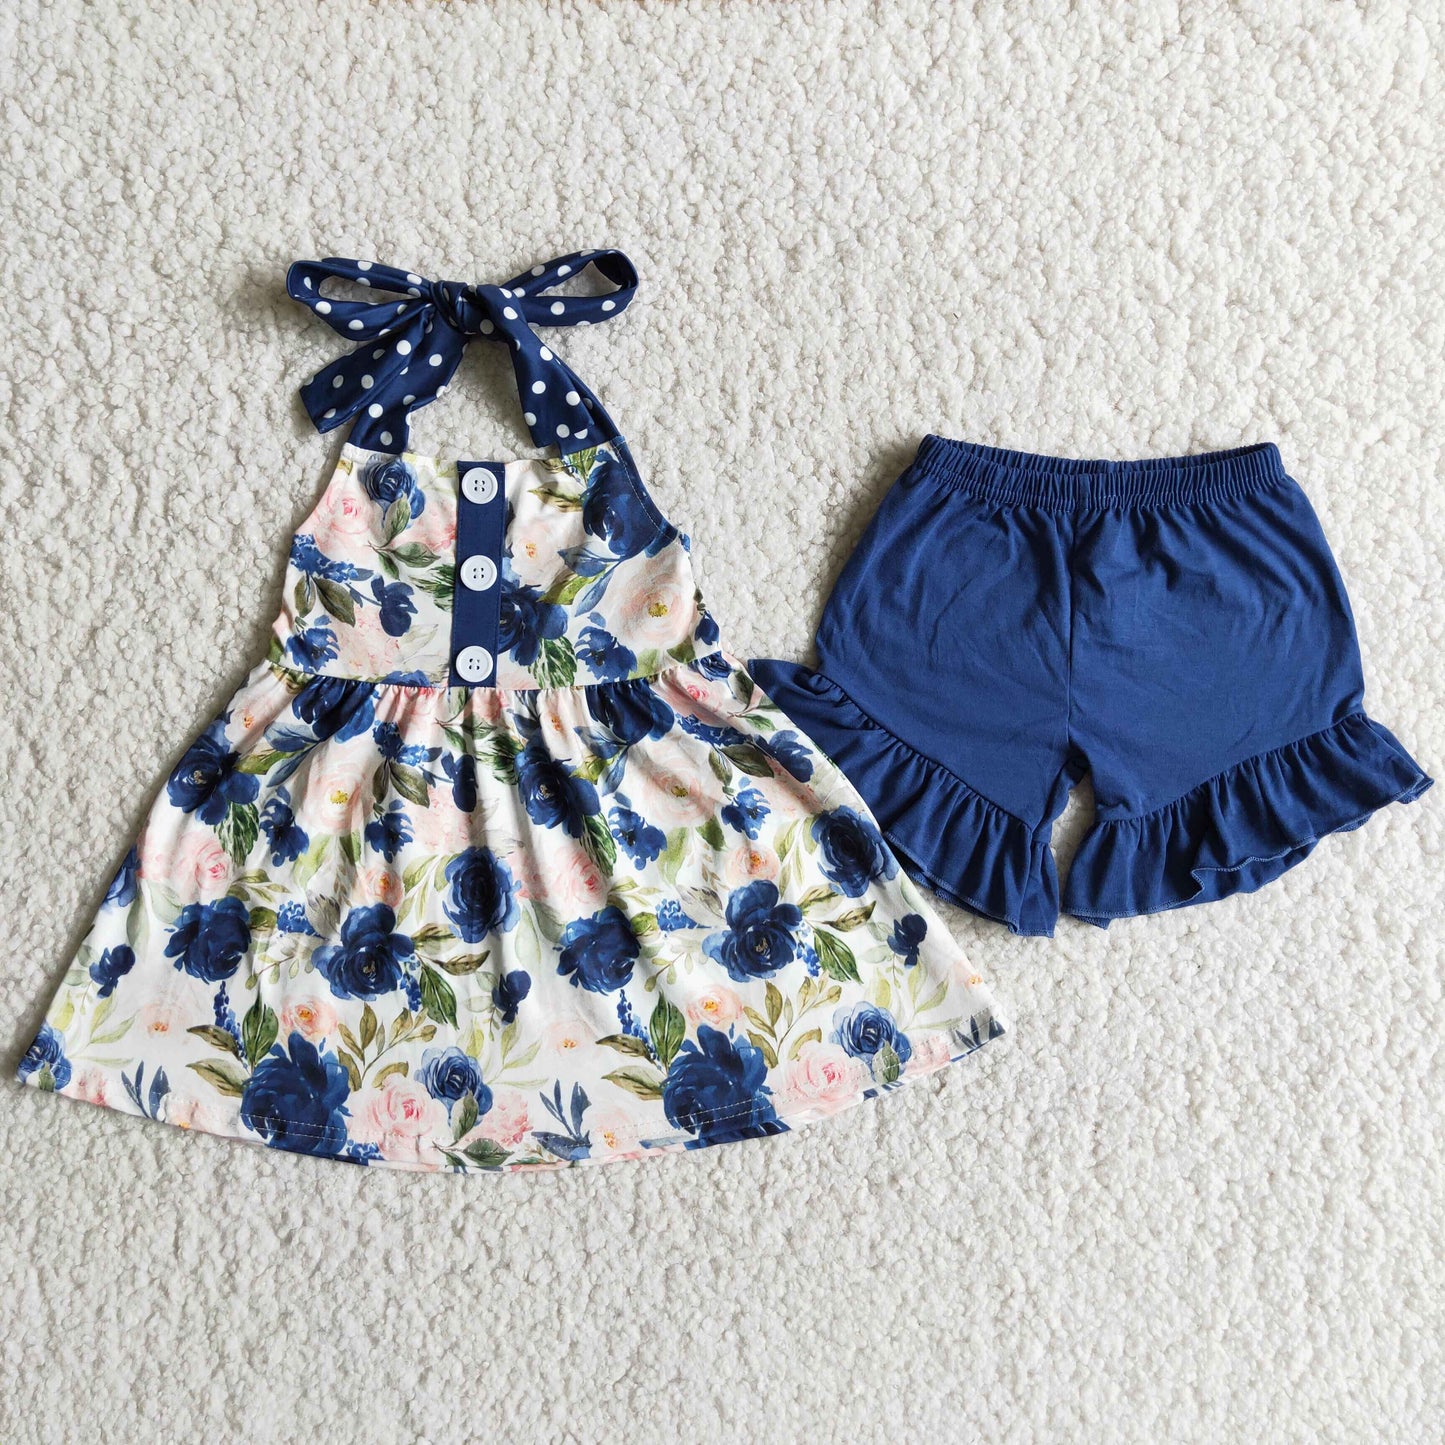 Blue floral backless tunic ruffle shorts girls outfits